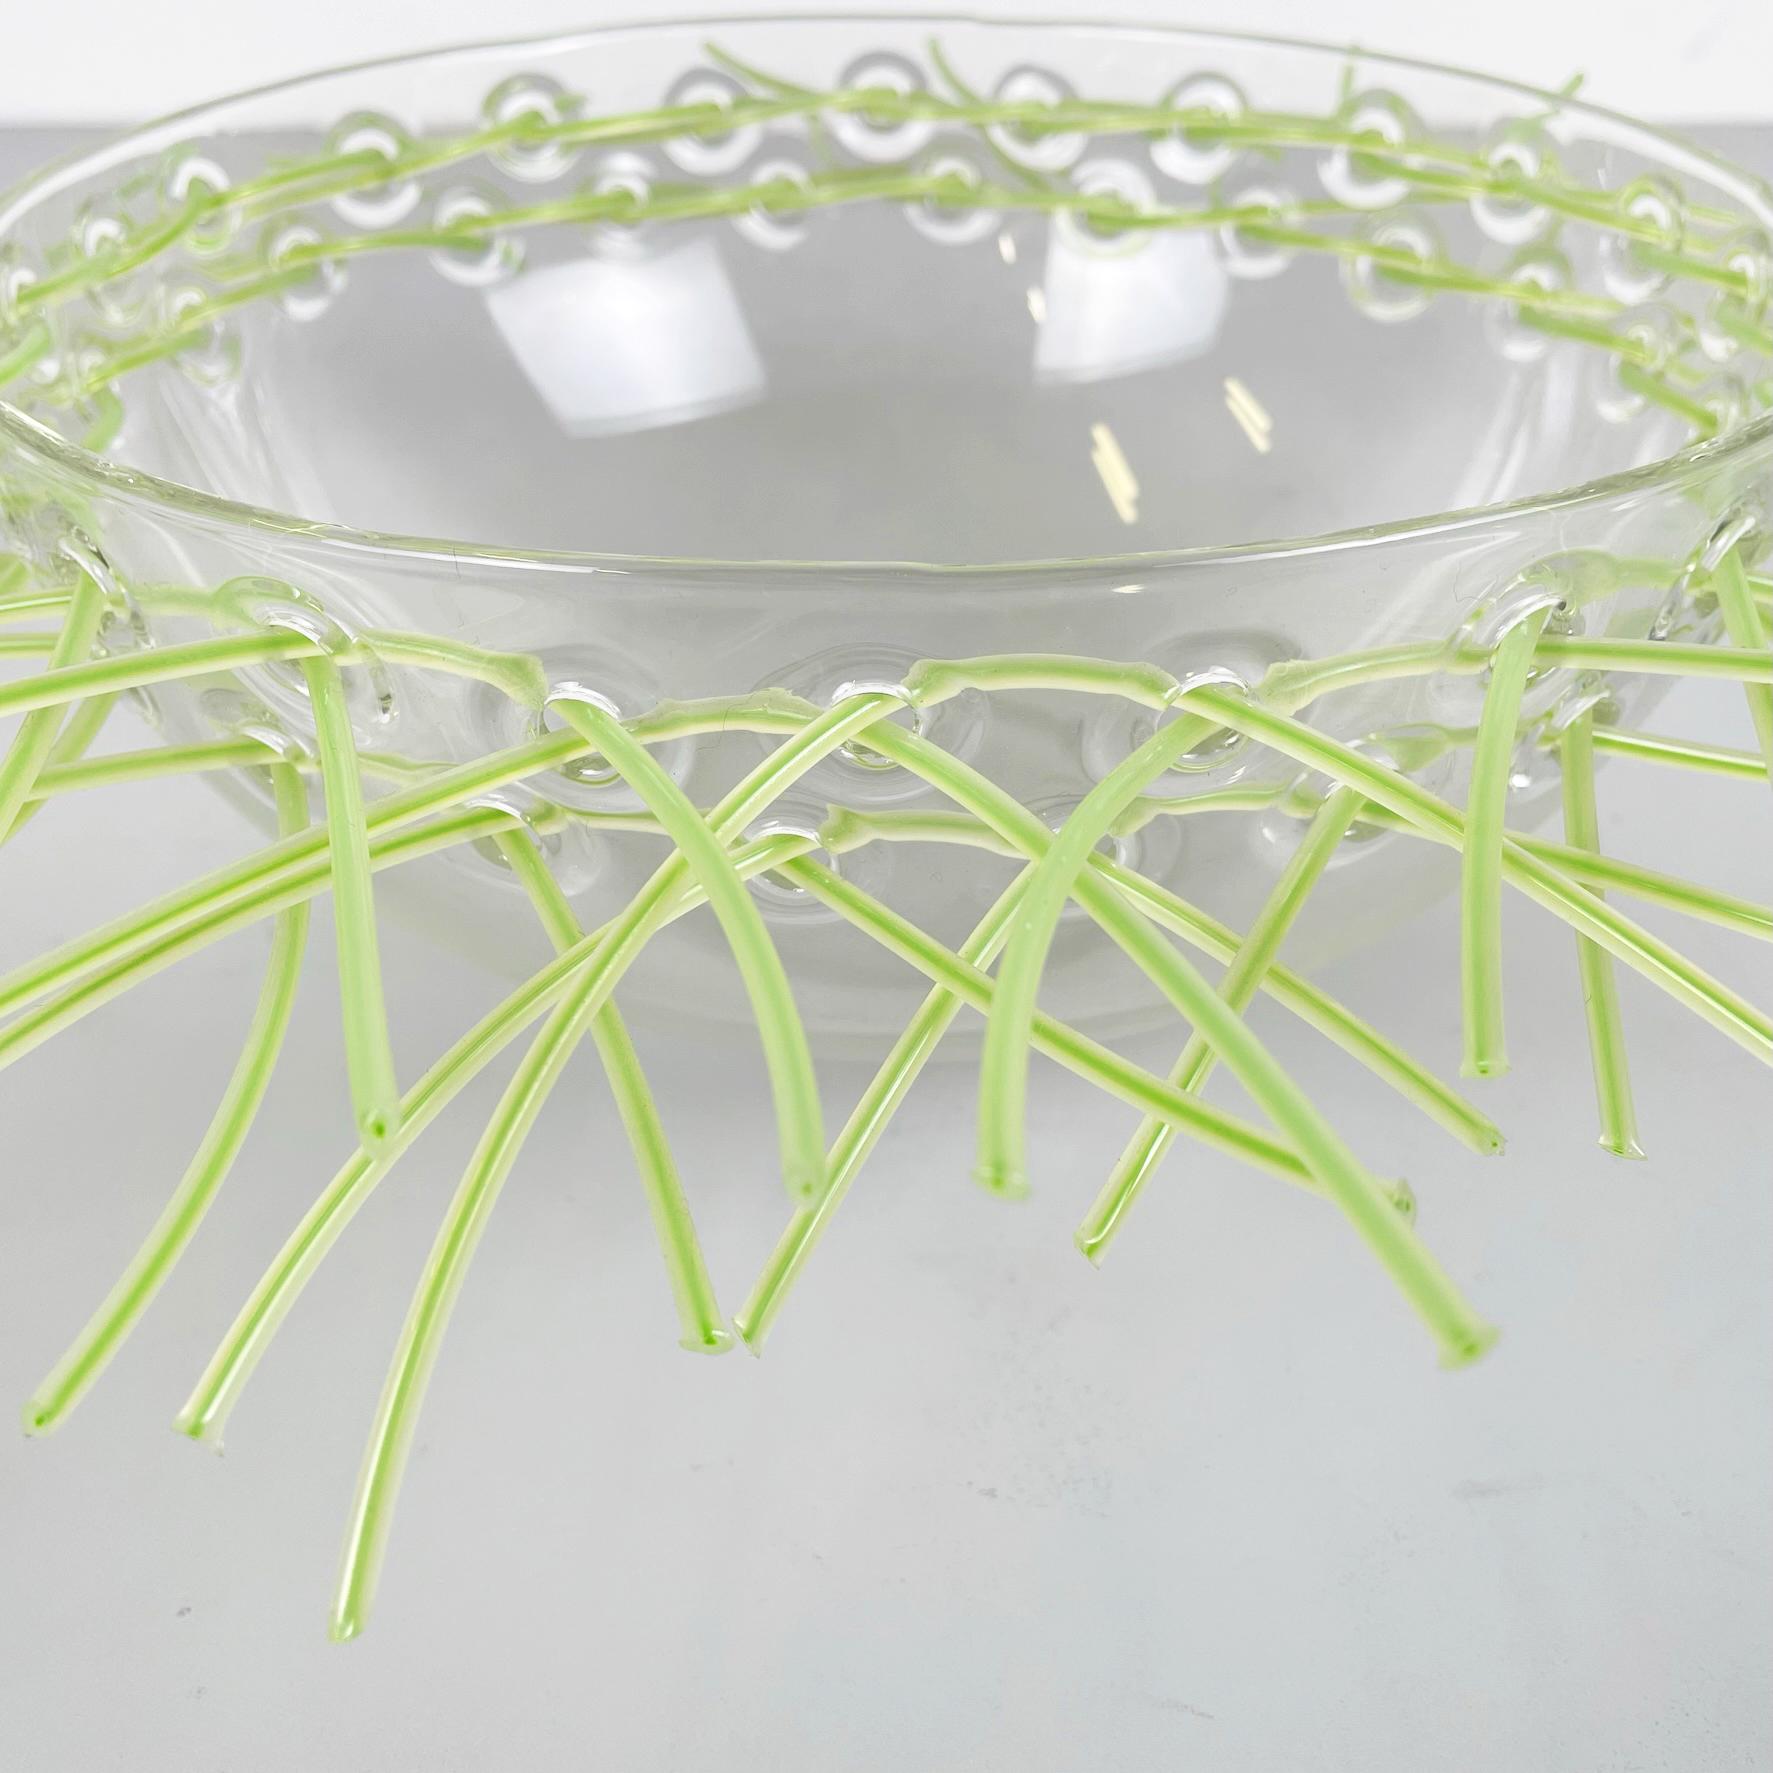 Italian Postmodern Glass Green Plastic Pocket Emptier Bowl by Cleto Munari, 2000 In Good Condition For Sale In MIlano, IT